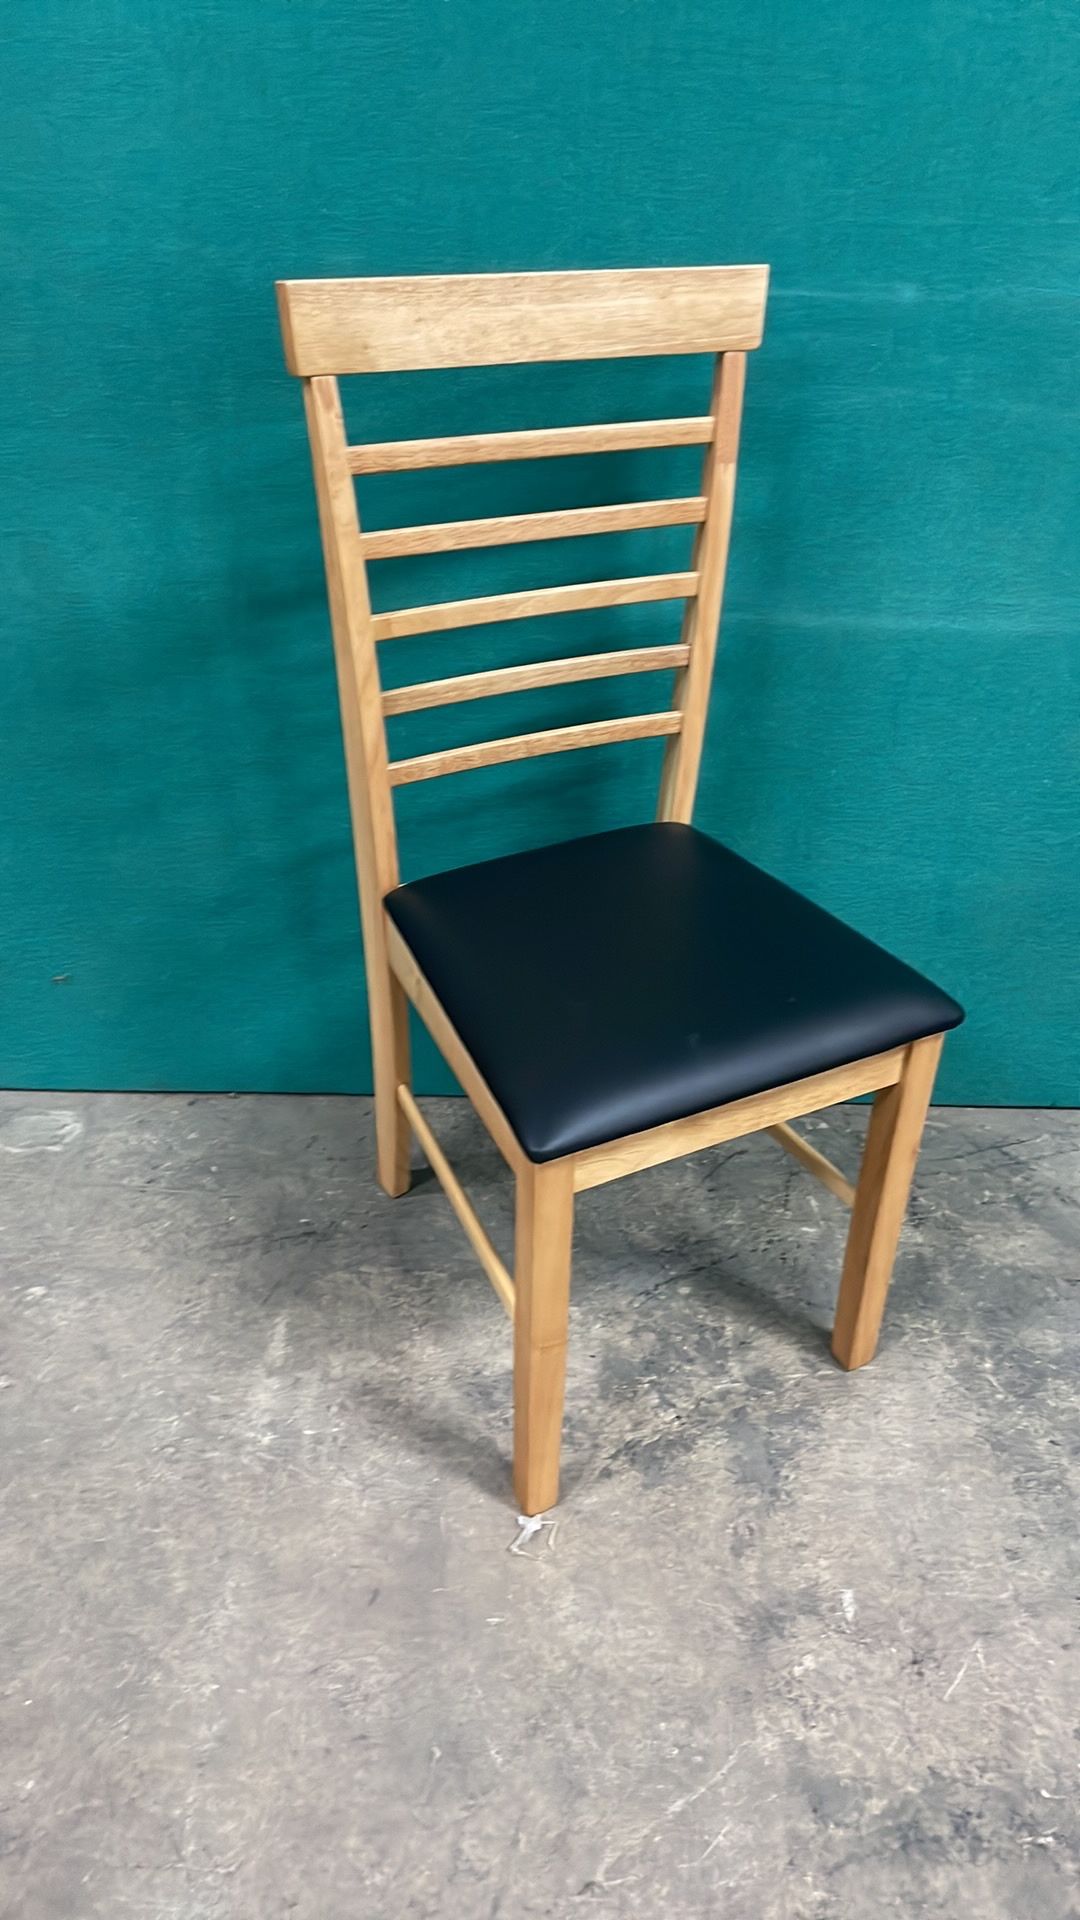 5 x Hanover Chairs Solid Beech